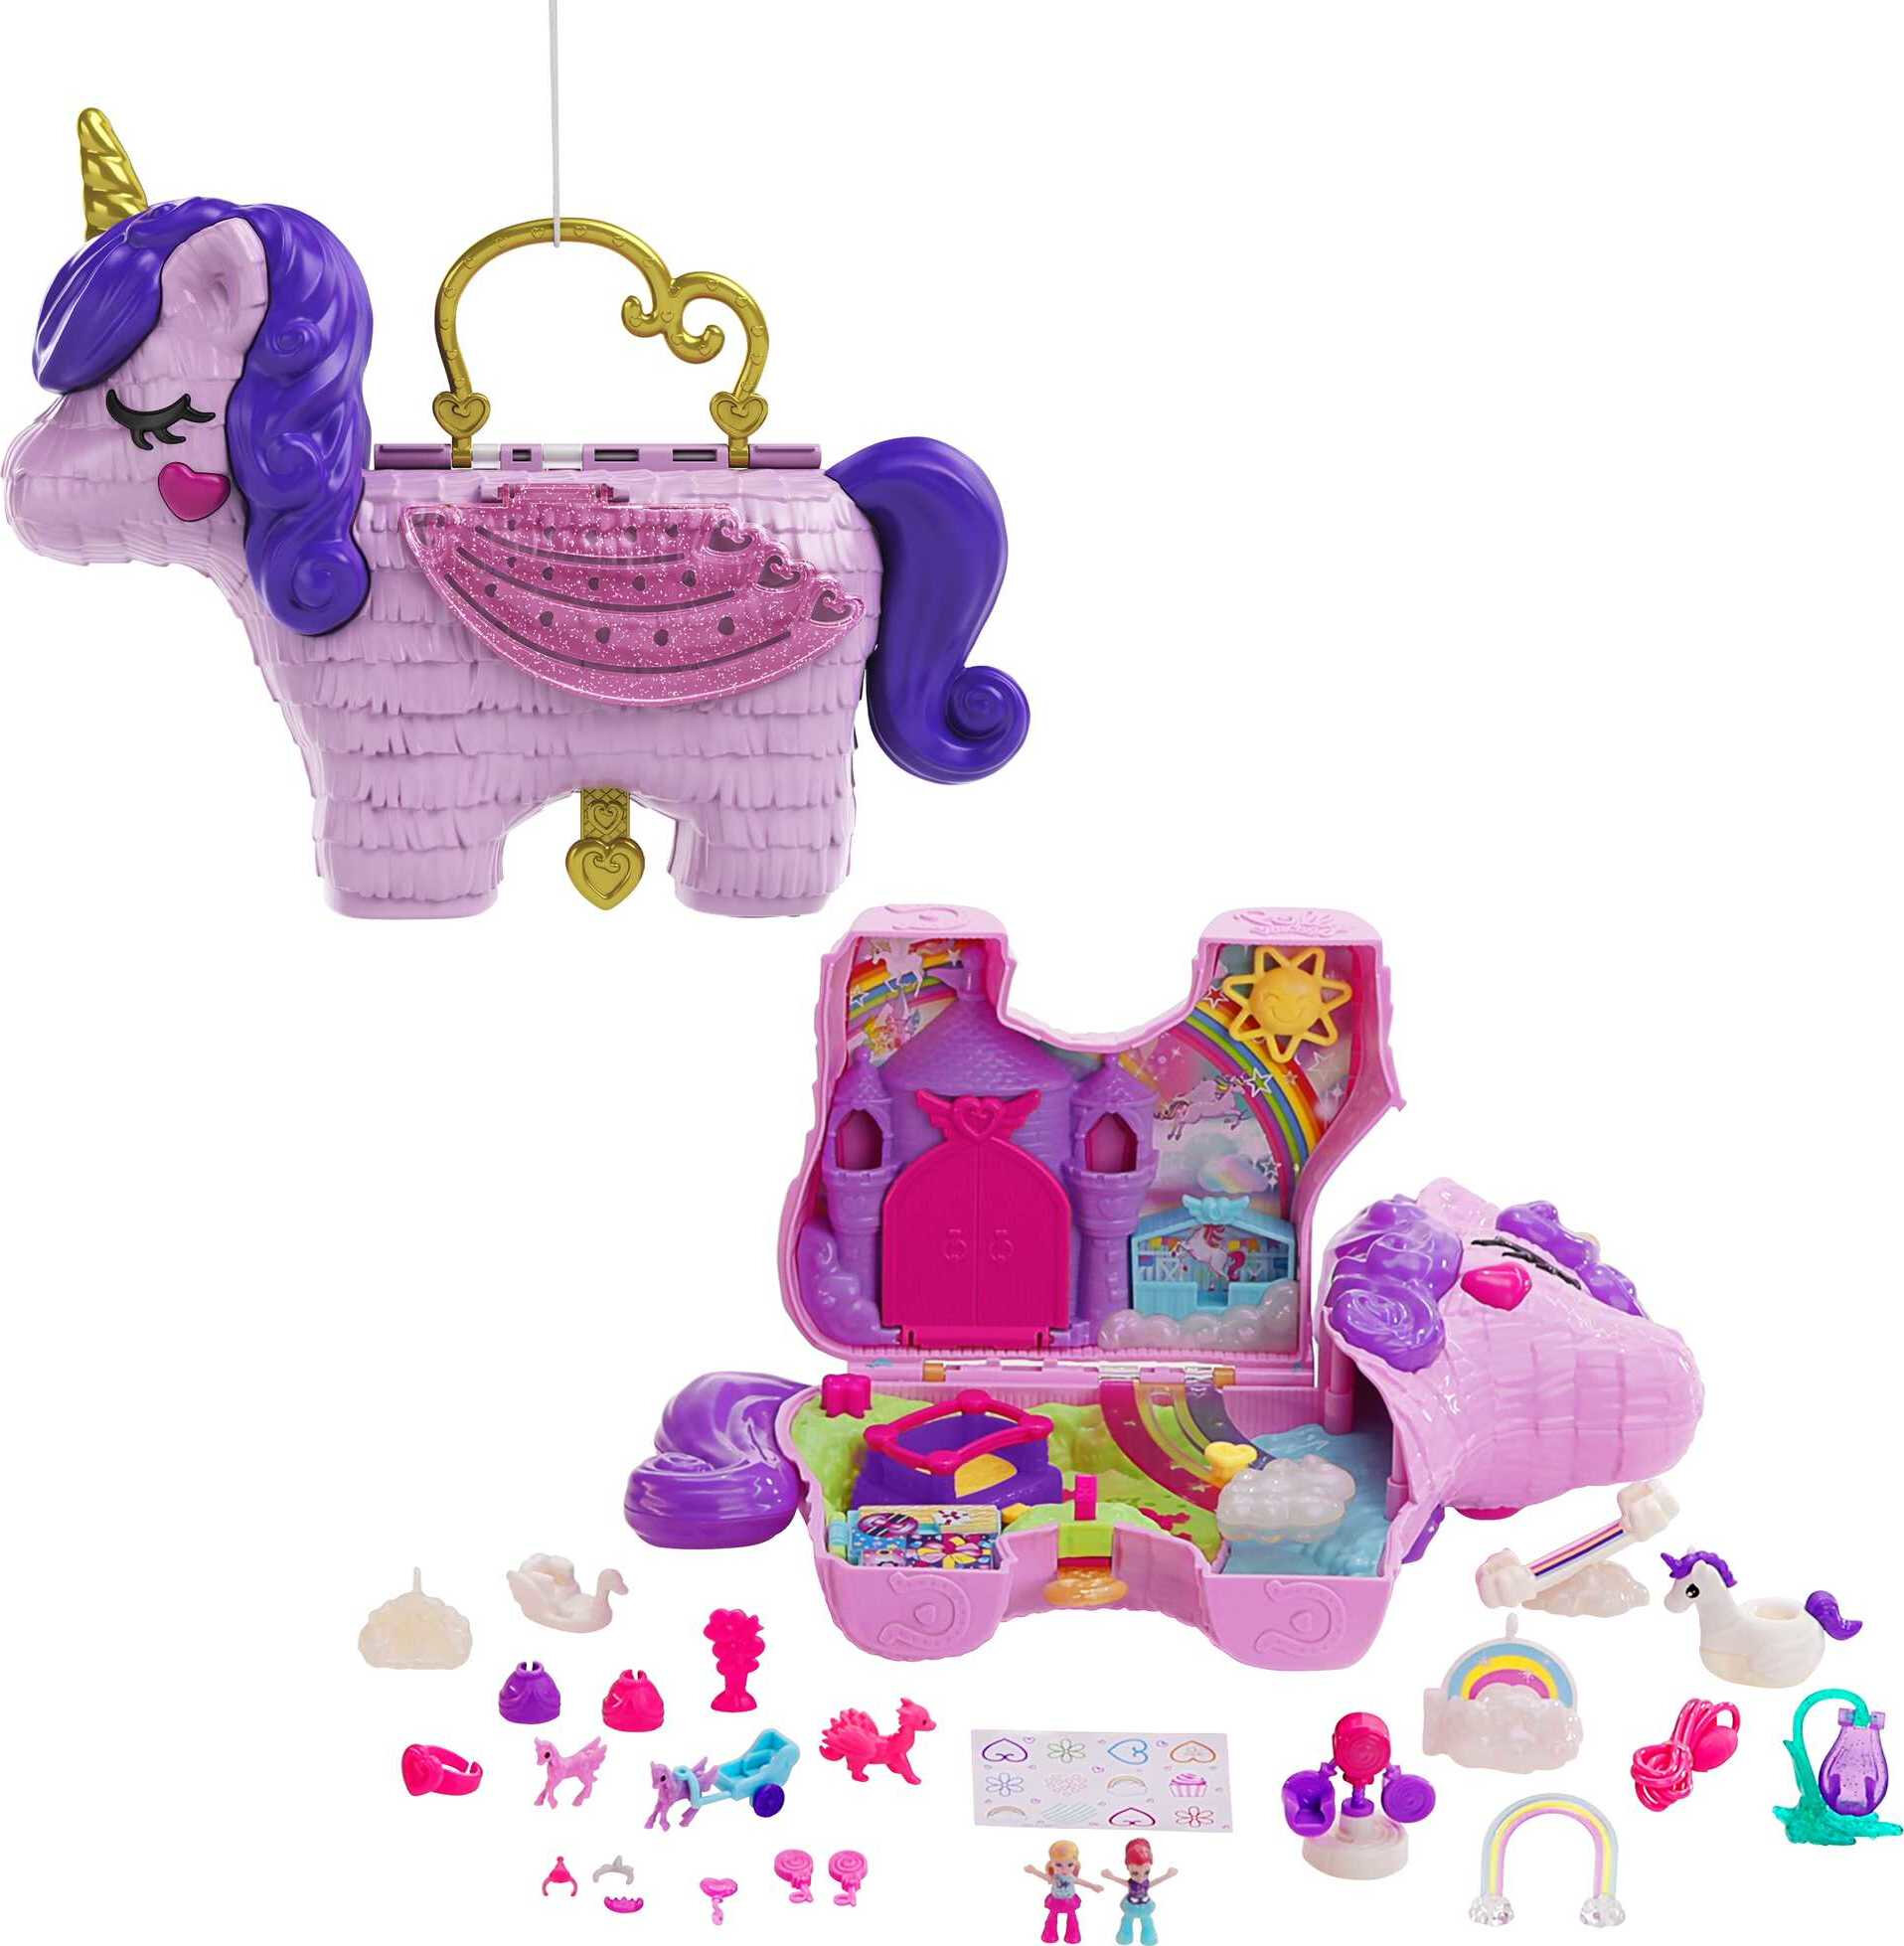 Polly Pocket 2-in-1 Unicorn Party Travel Toy, Large Compact with 2 Dolls & 25 Surprise Accessories - image 1 of 9